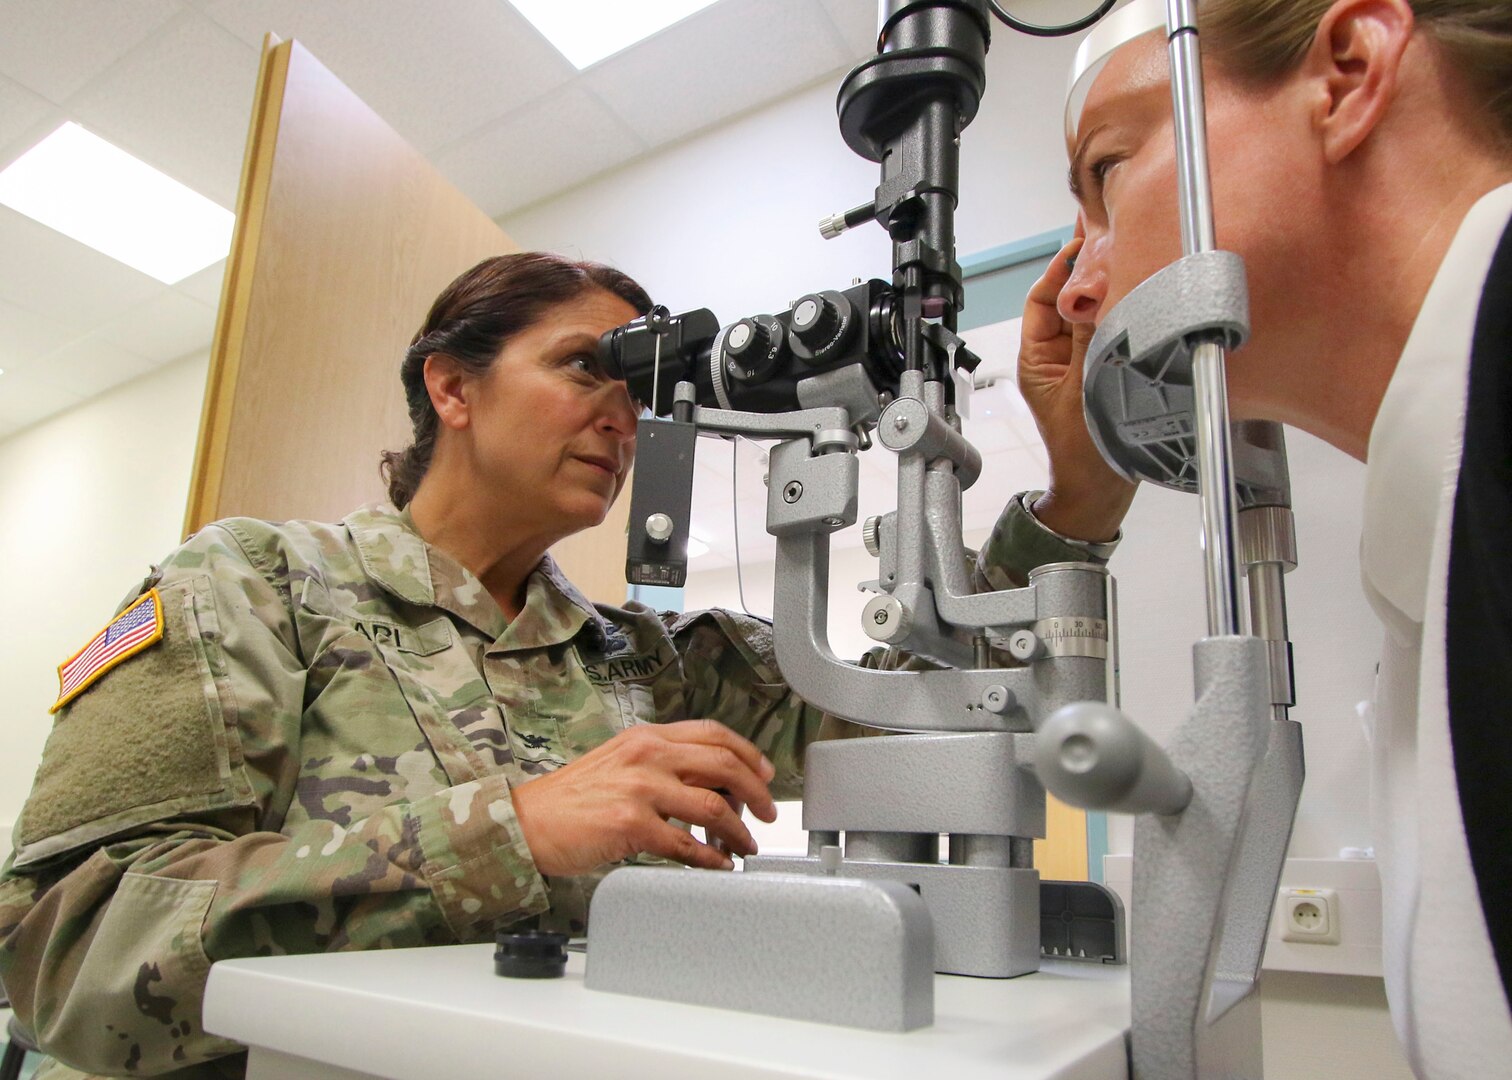 Col. Adrienne Ari, an optometrist at Landstuhl Regional Medical Center in Germany, performs an eye examination Sept. 19, 2019. In October 2018, the Army, Navy and Air Force started the process to transfer the administration and management of their military medical treatment facilities to DHA. Phase II of that transition was completed this fall with roughly half of the MTFs in the continental U.S. now under the DHA. All other hospitals and clinics, including those overseas, will follow suit by 2021.